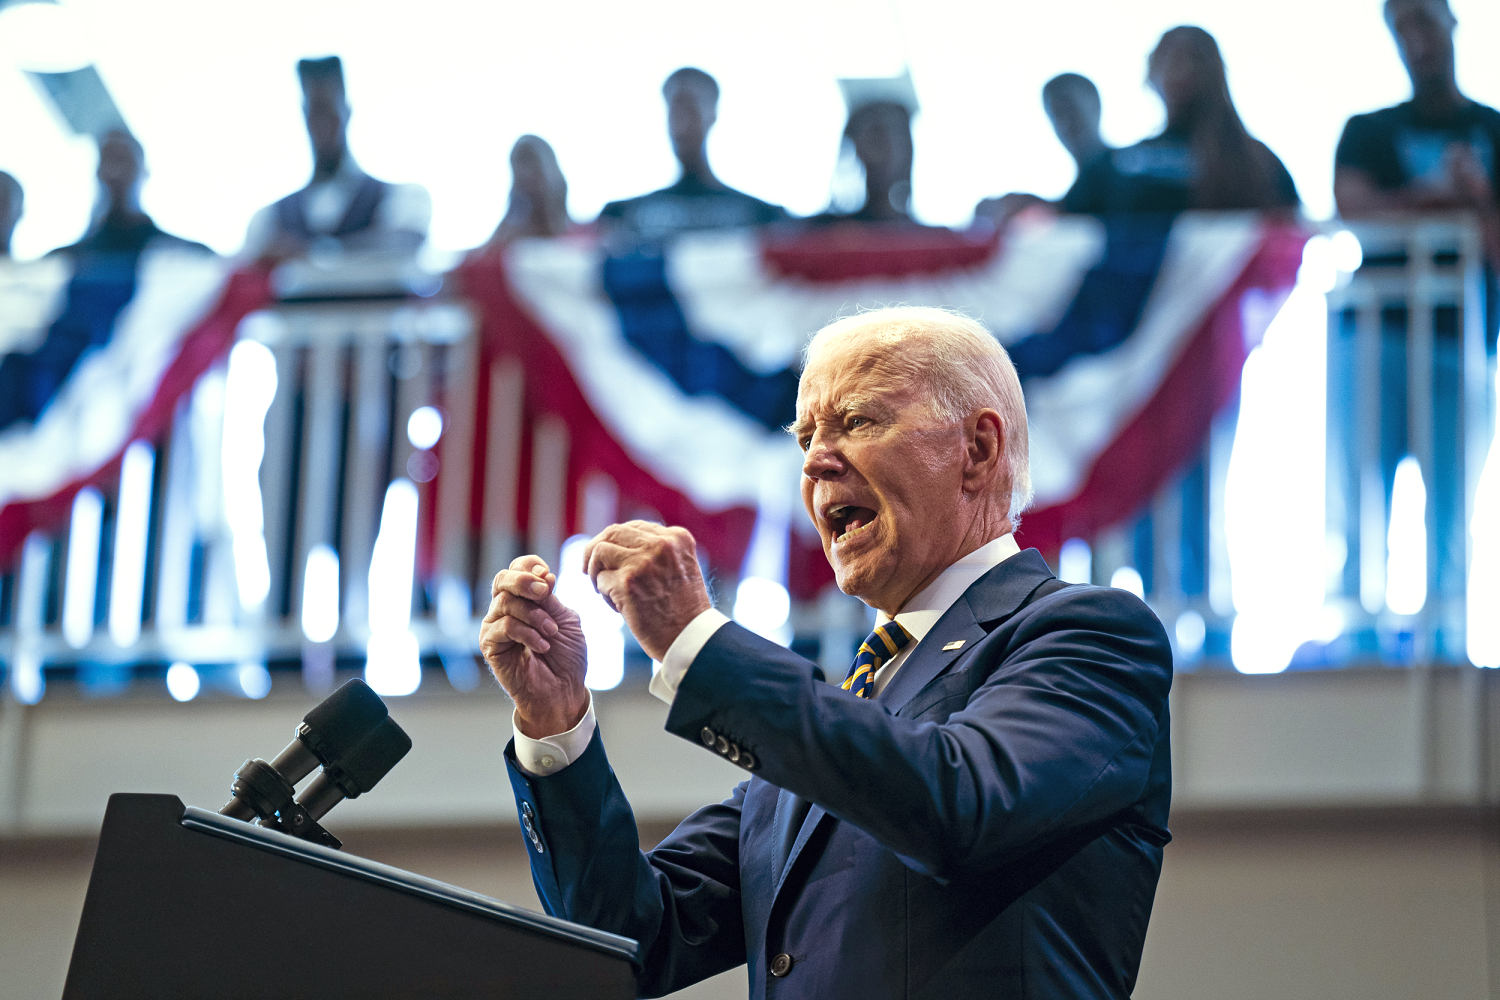 Biden camp lays out counter-messaging plans for GOP debate